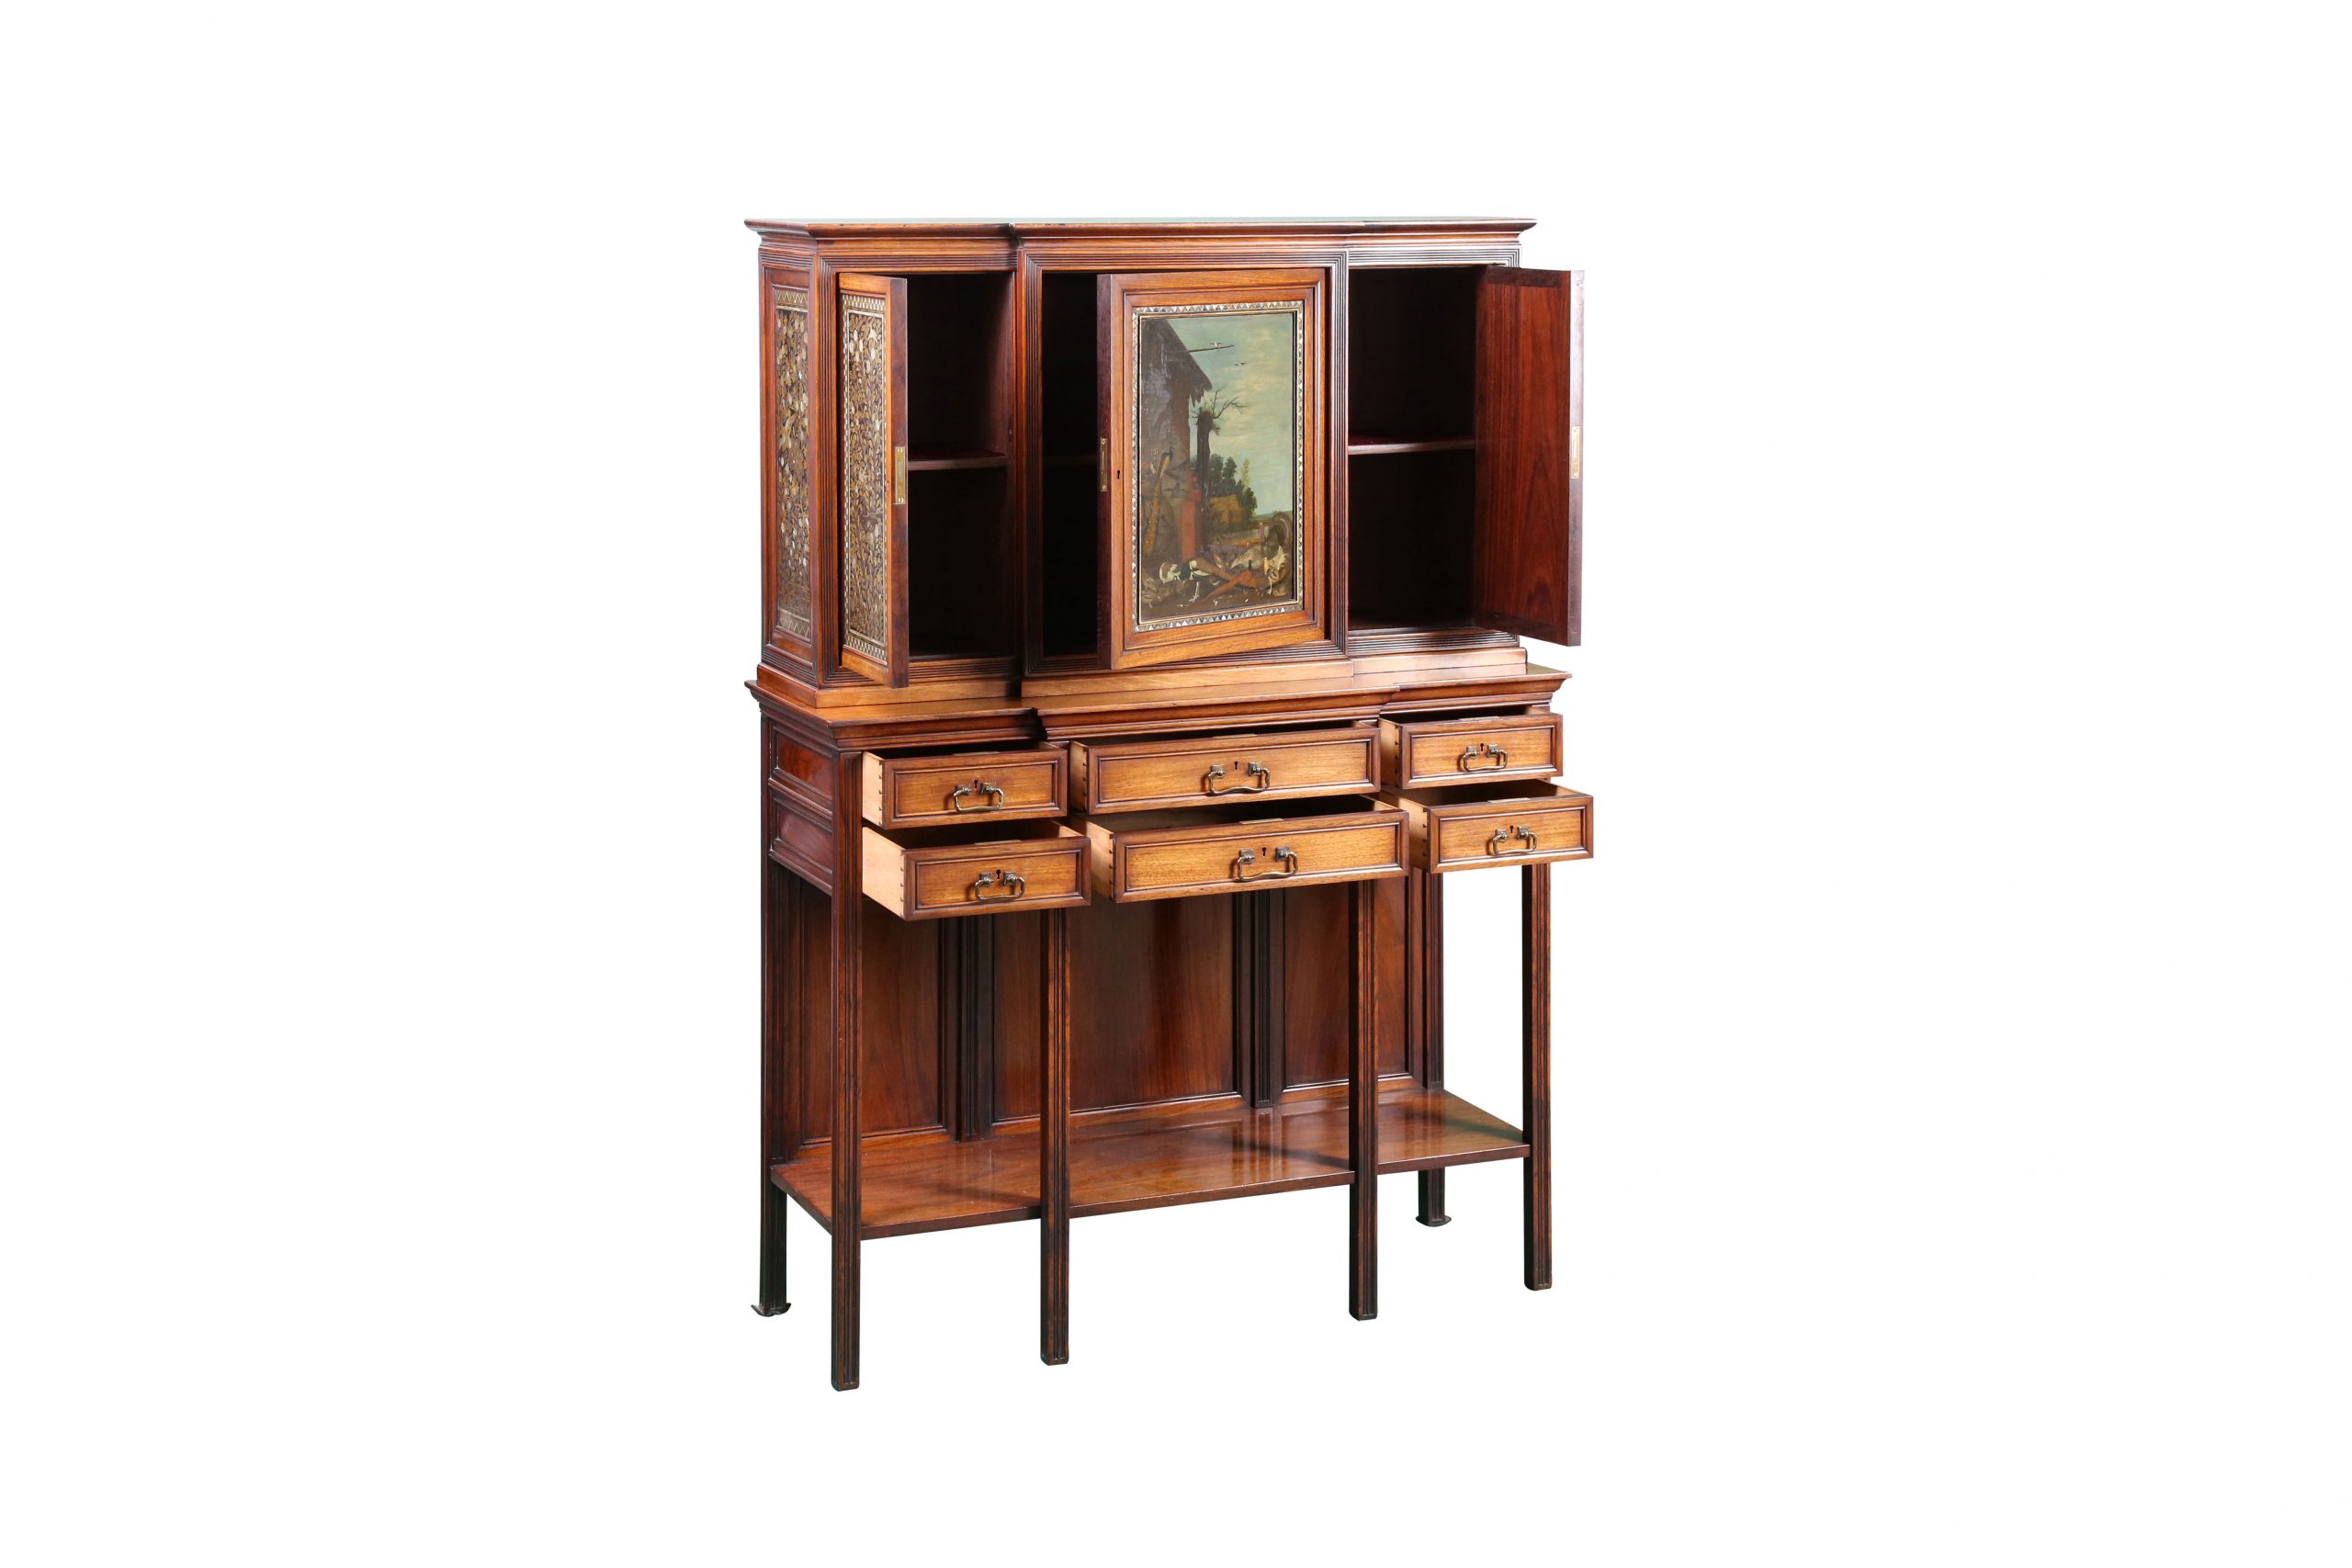 Chiswick’s Nov. 7 auction led by rare Aesthetic Movement cabinet that incorporates Dutch Old Master painting - Auction Daily